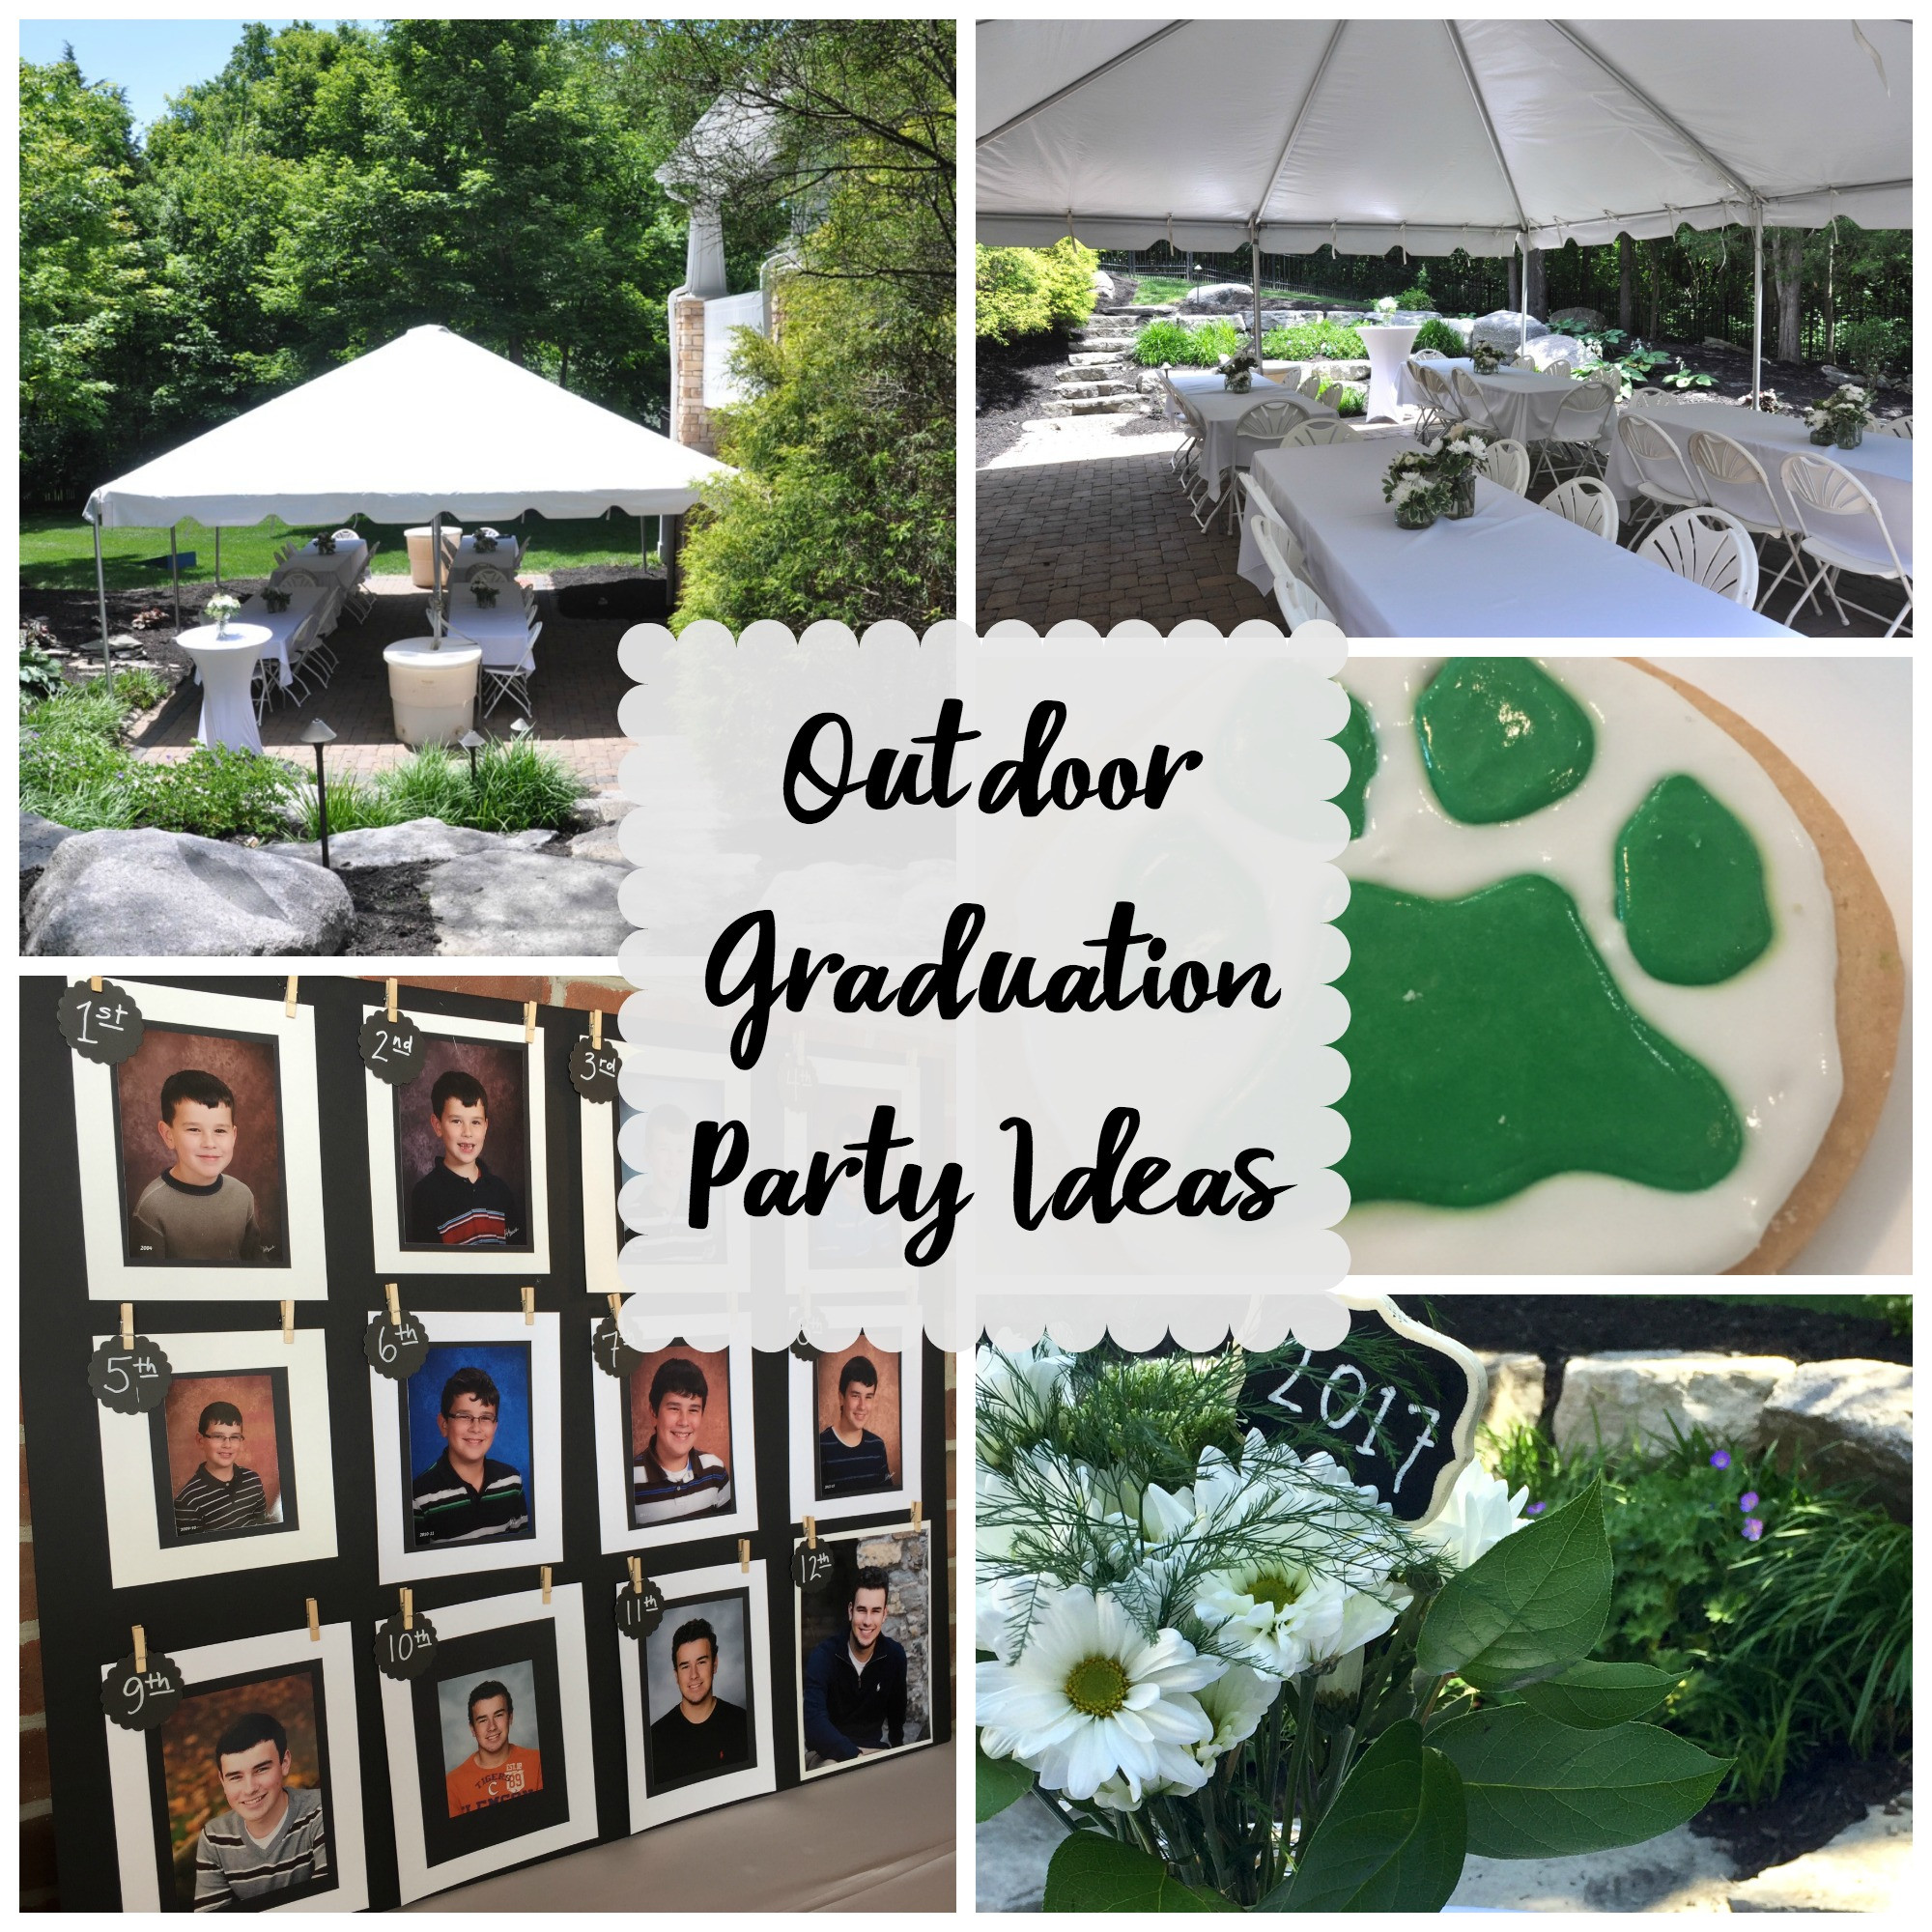 Doctoral Graduation Party Ideas
 Outdoor Graduation Party Evolution of Style